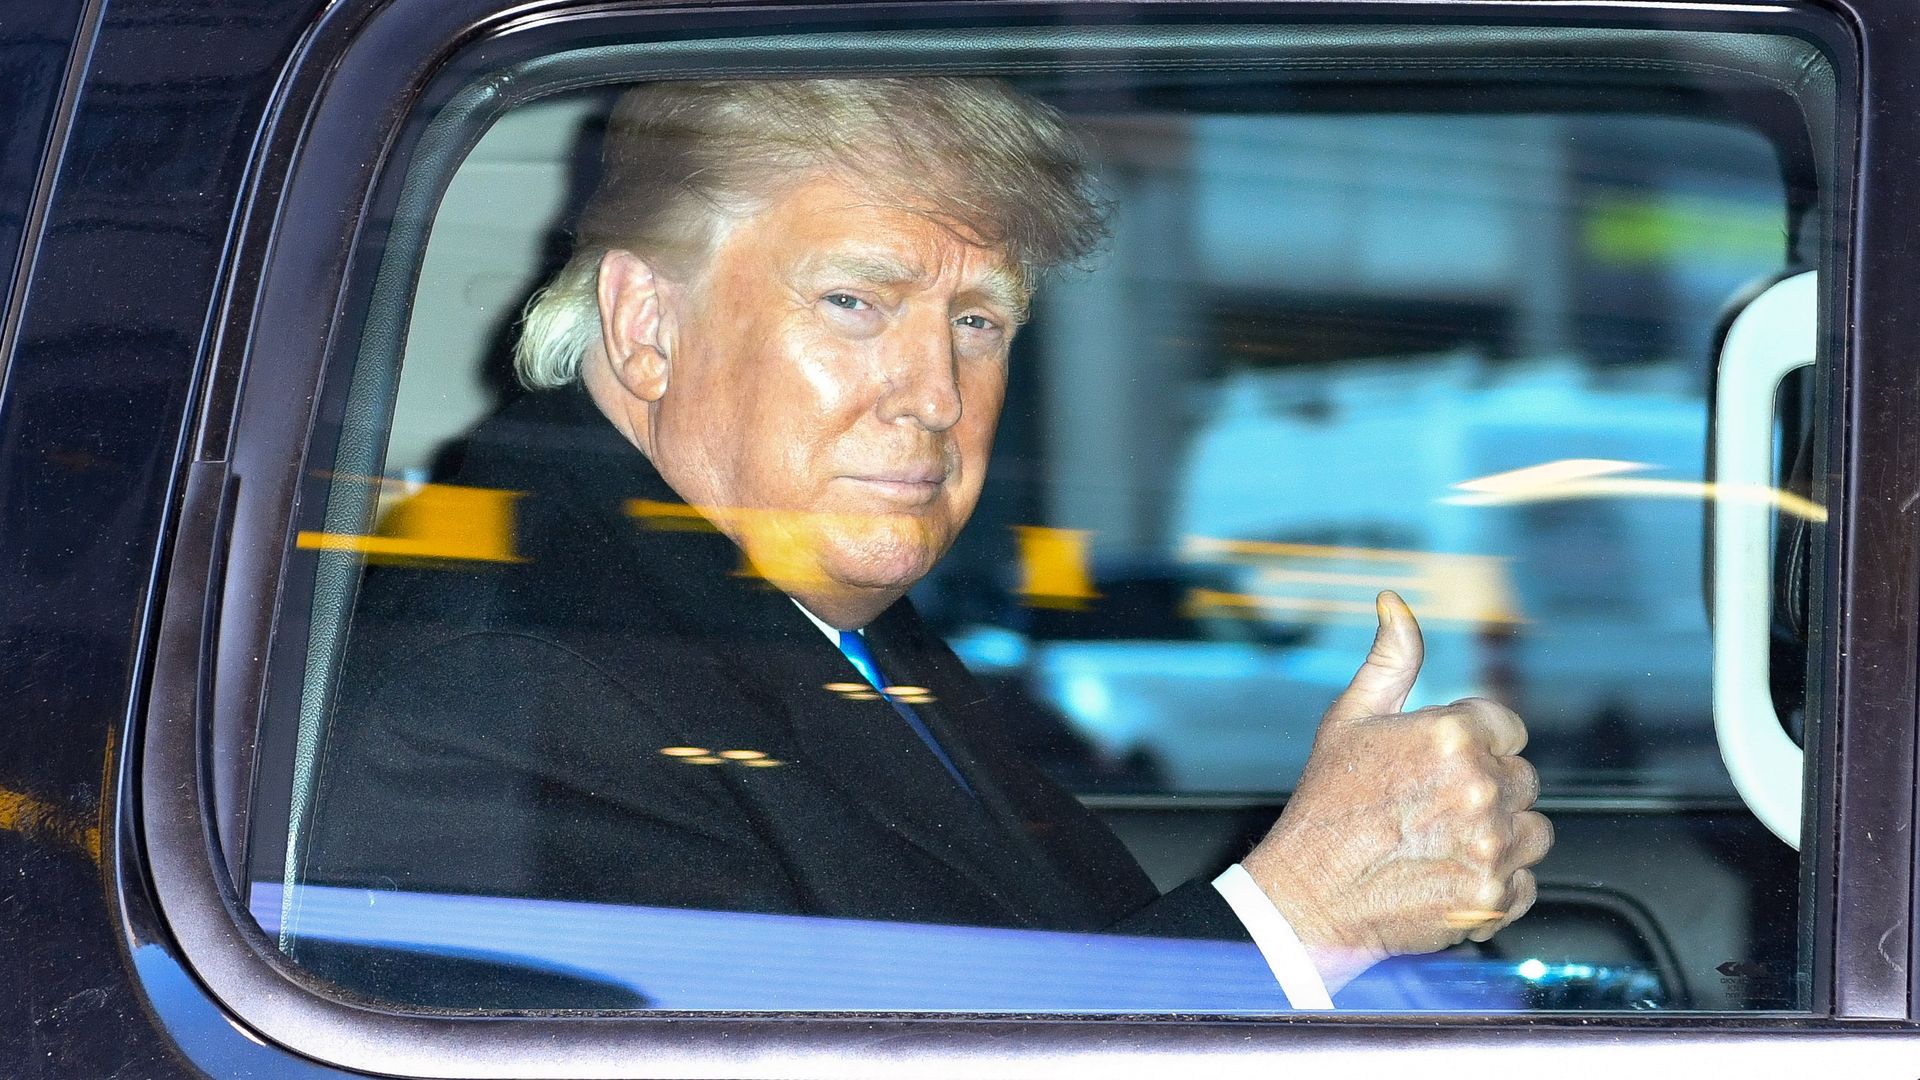 A photo of former President Donald Trump looking out the window of a vehicle. 